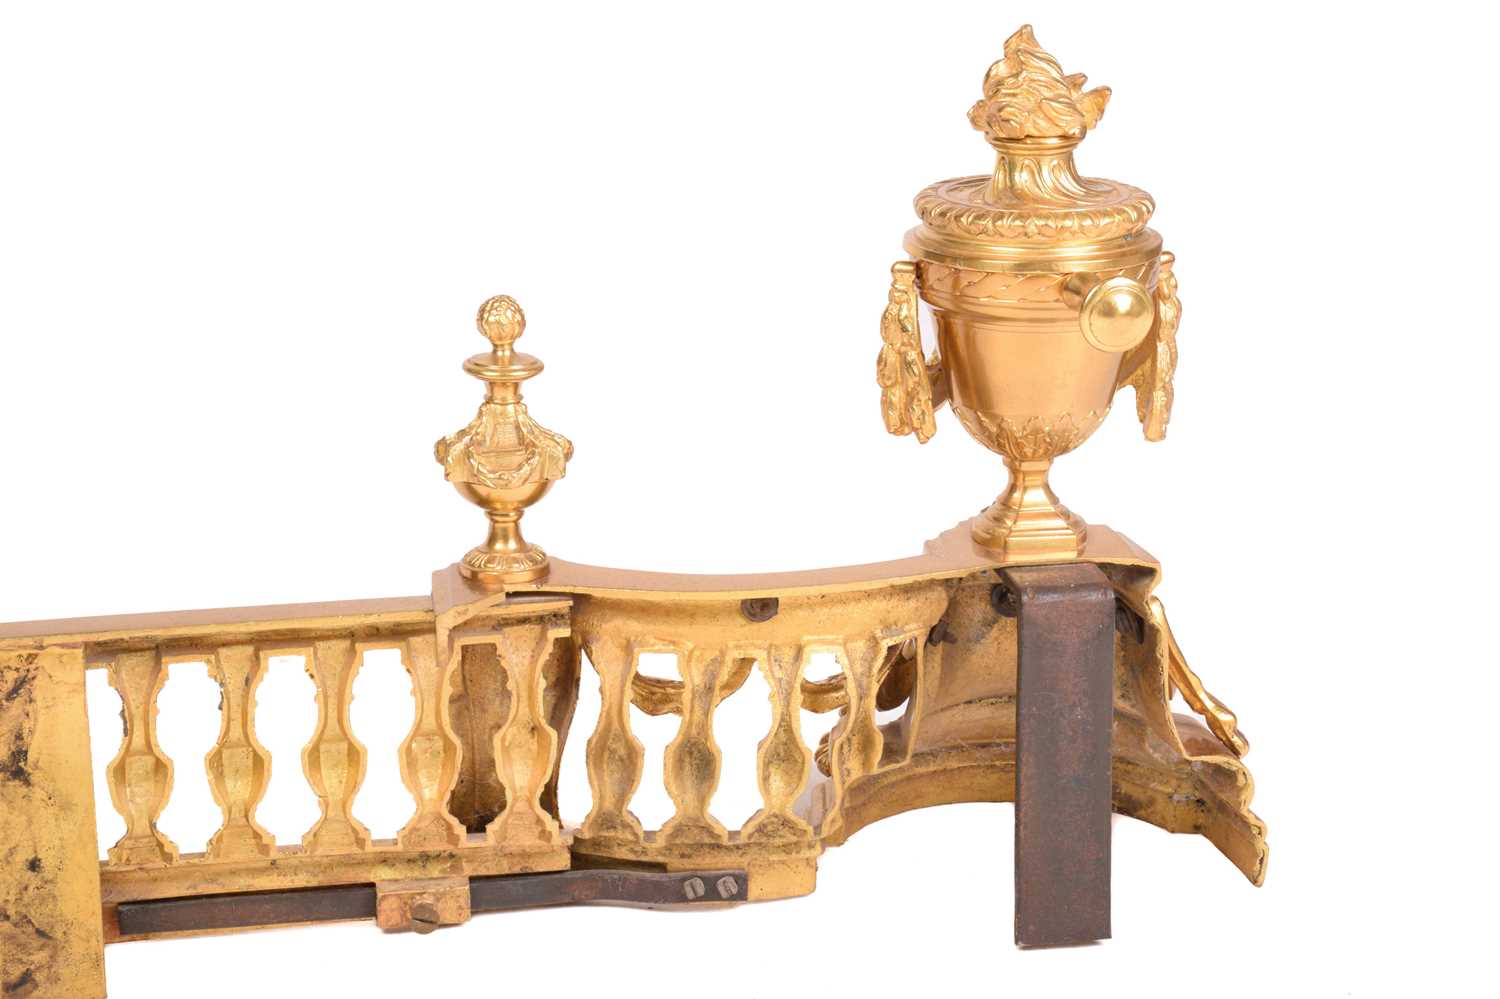 A pair of French empire-style gilt bronze chenet and valence each end with flaming urns draped - Image 3 of 7